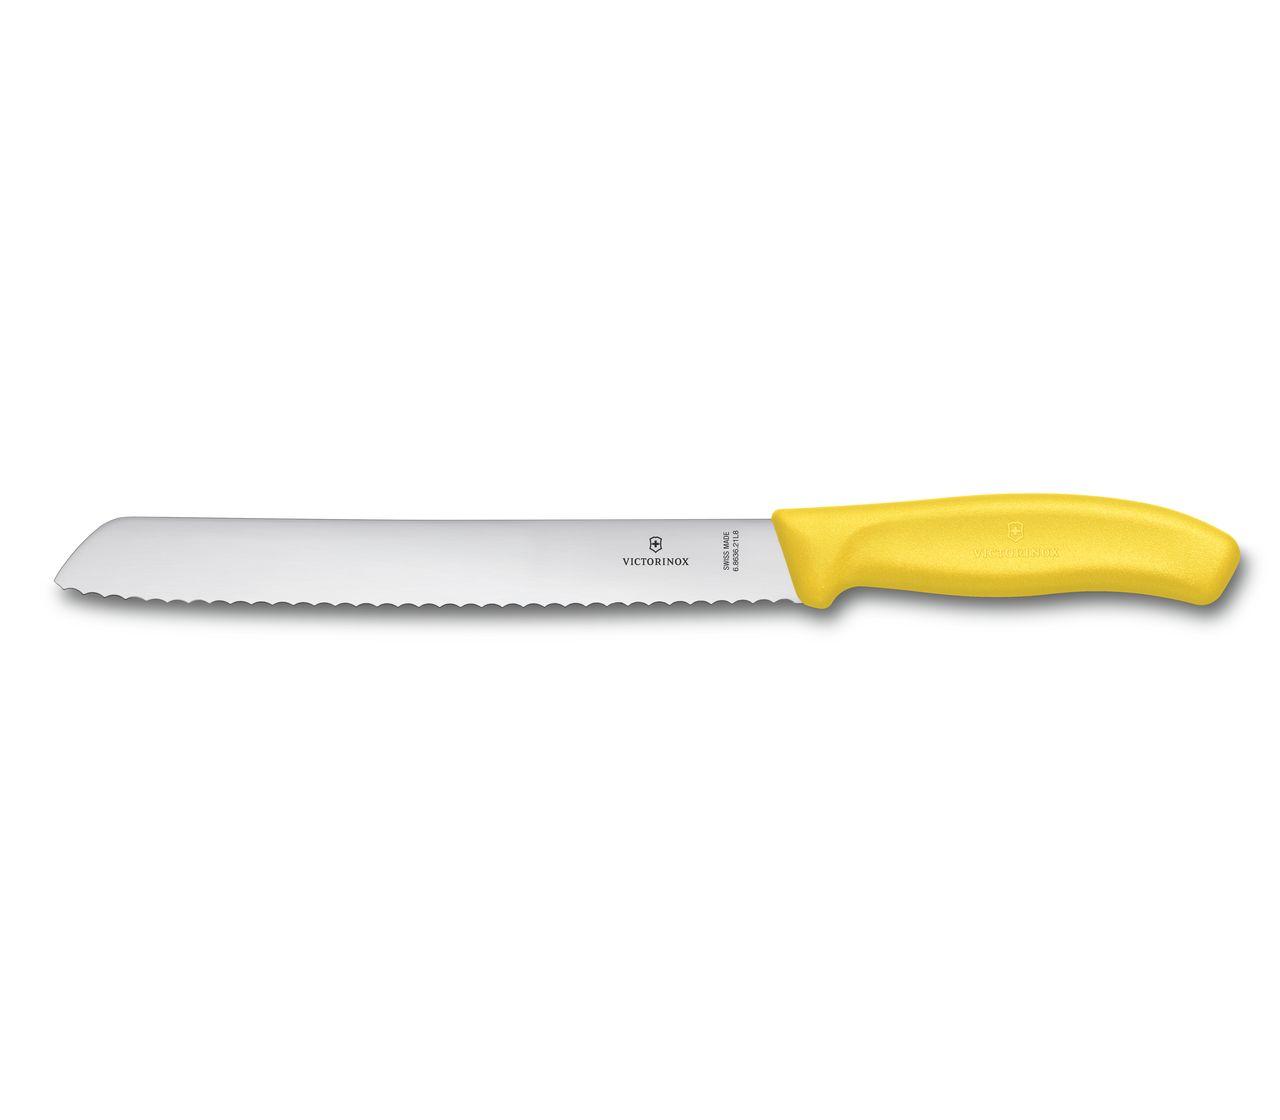 Victorinox Paring Knife with Wavy Edge Blade - Bunzl Processor Division